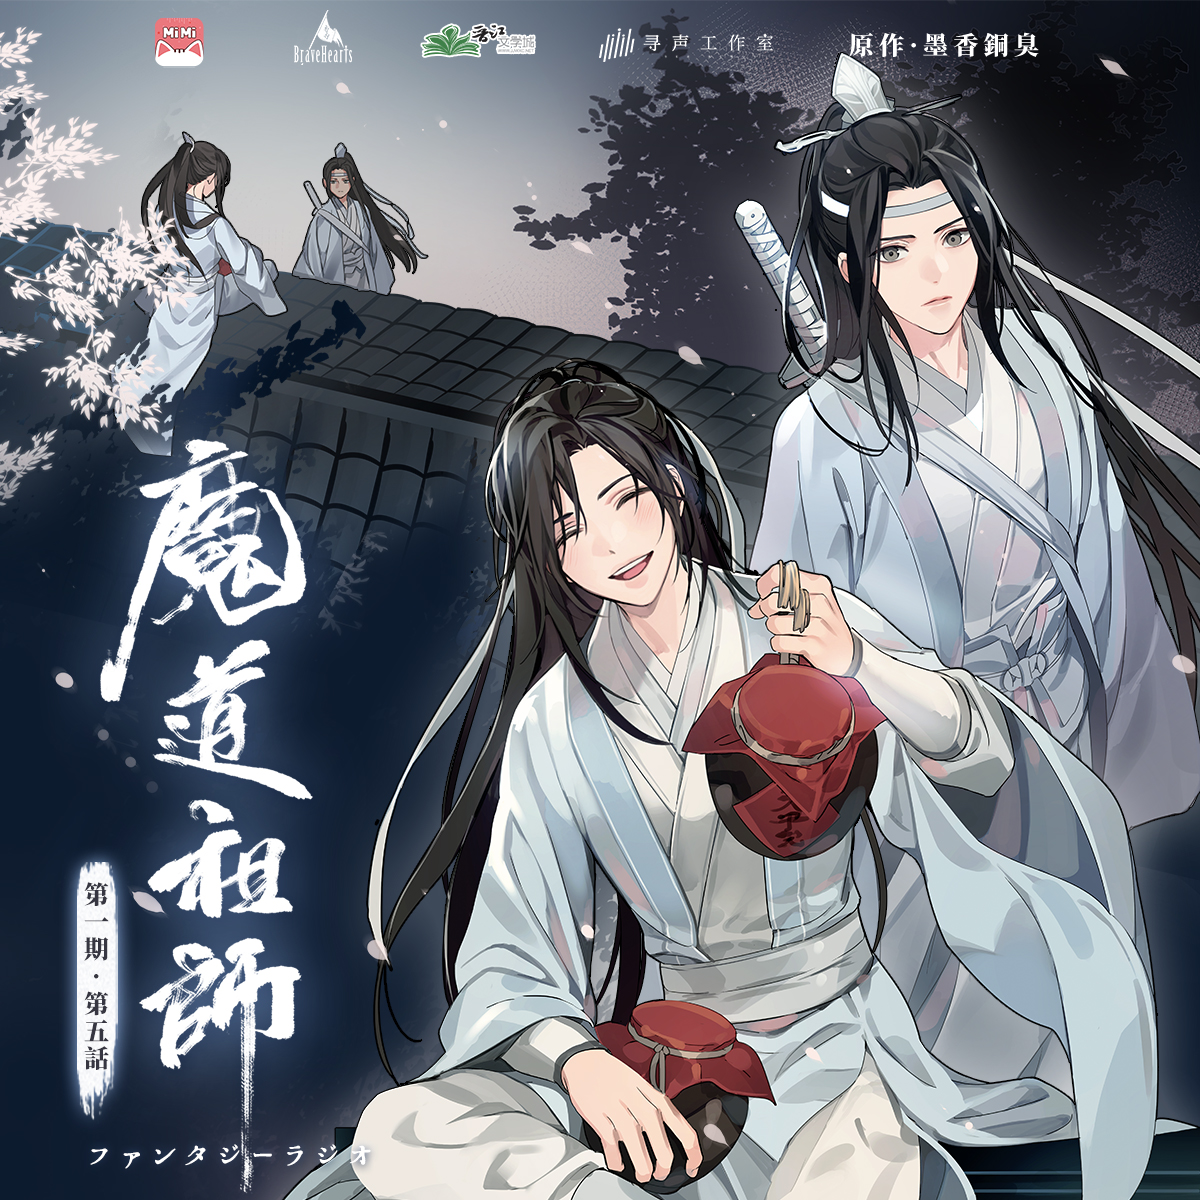 to be determined: Mo Dao Zu Shi Audio Drama S3 Ep 17 (END)